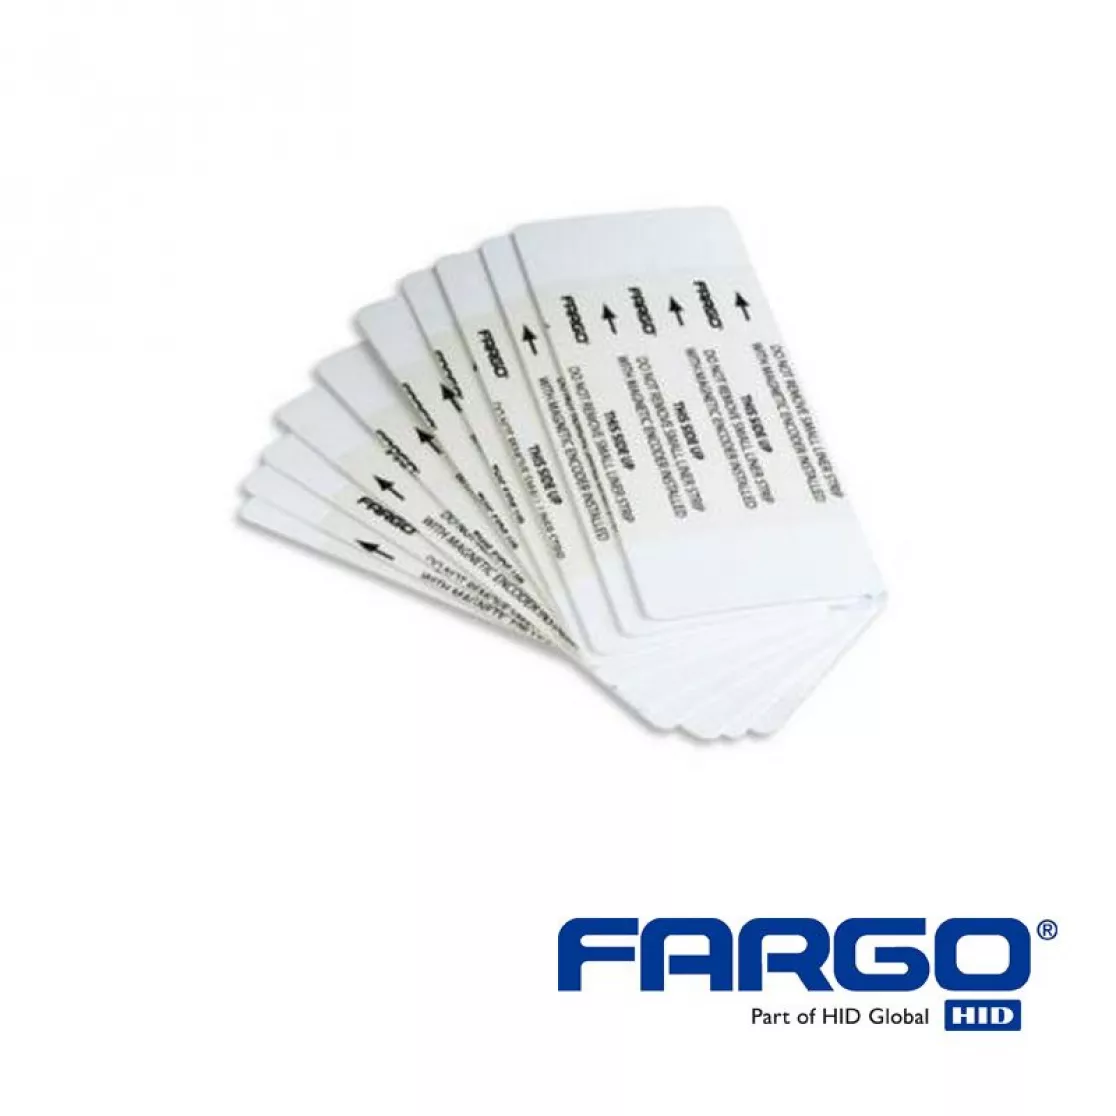 Cleaning card double-sided for hid fargo DTC1500e card printer